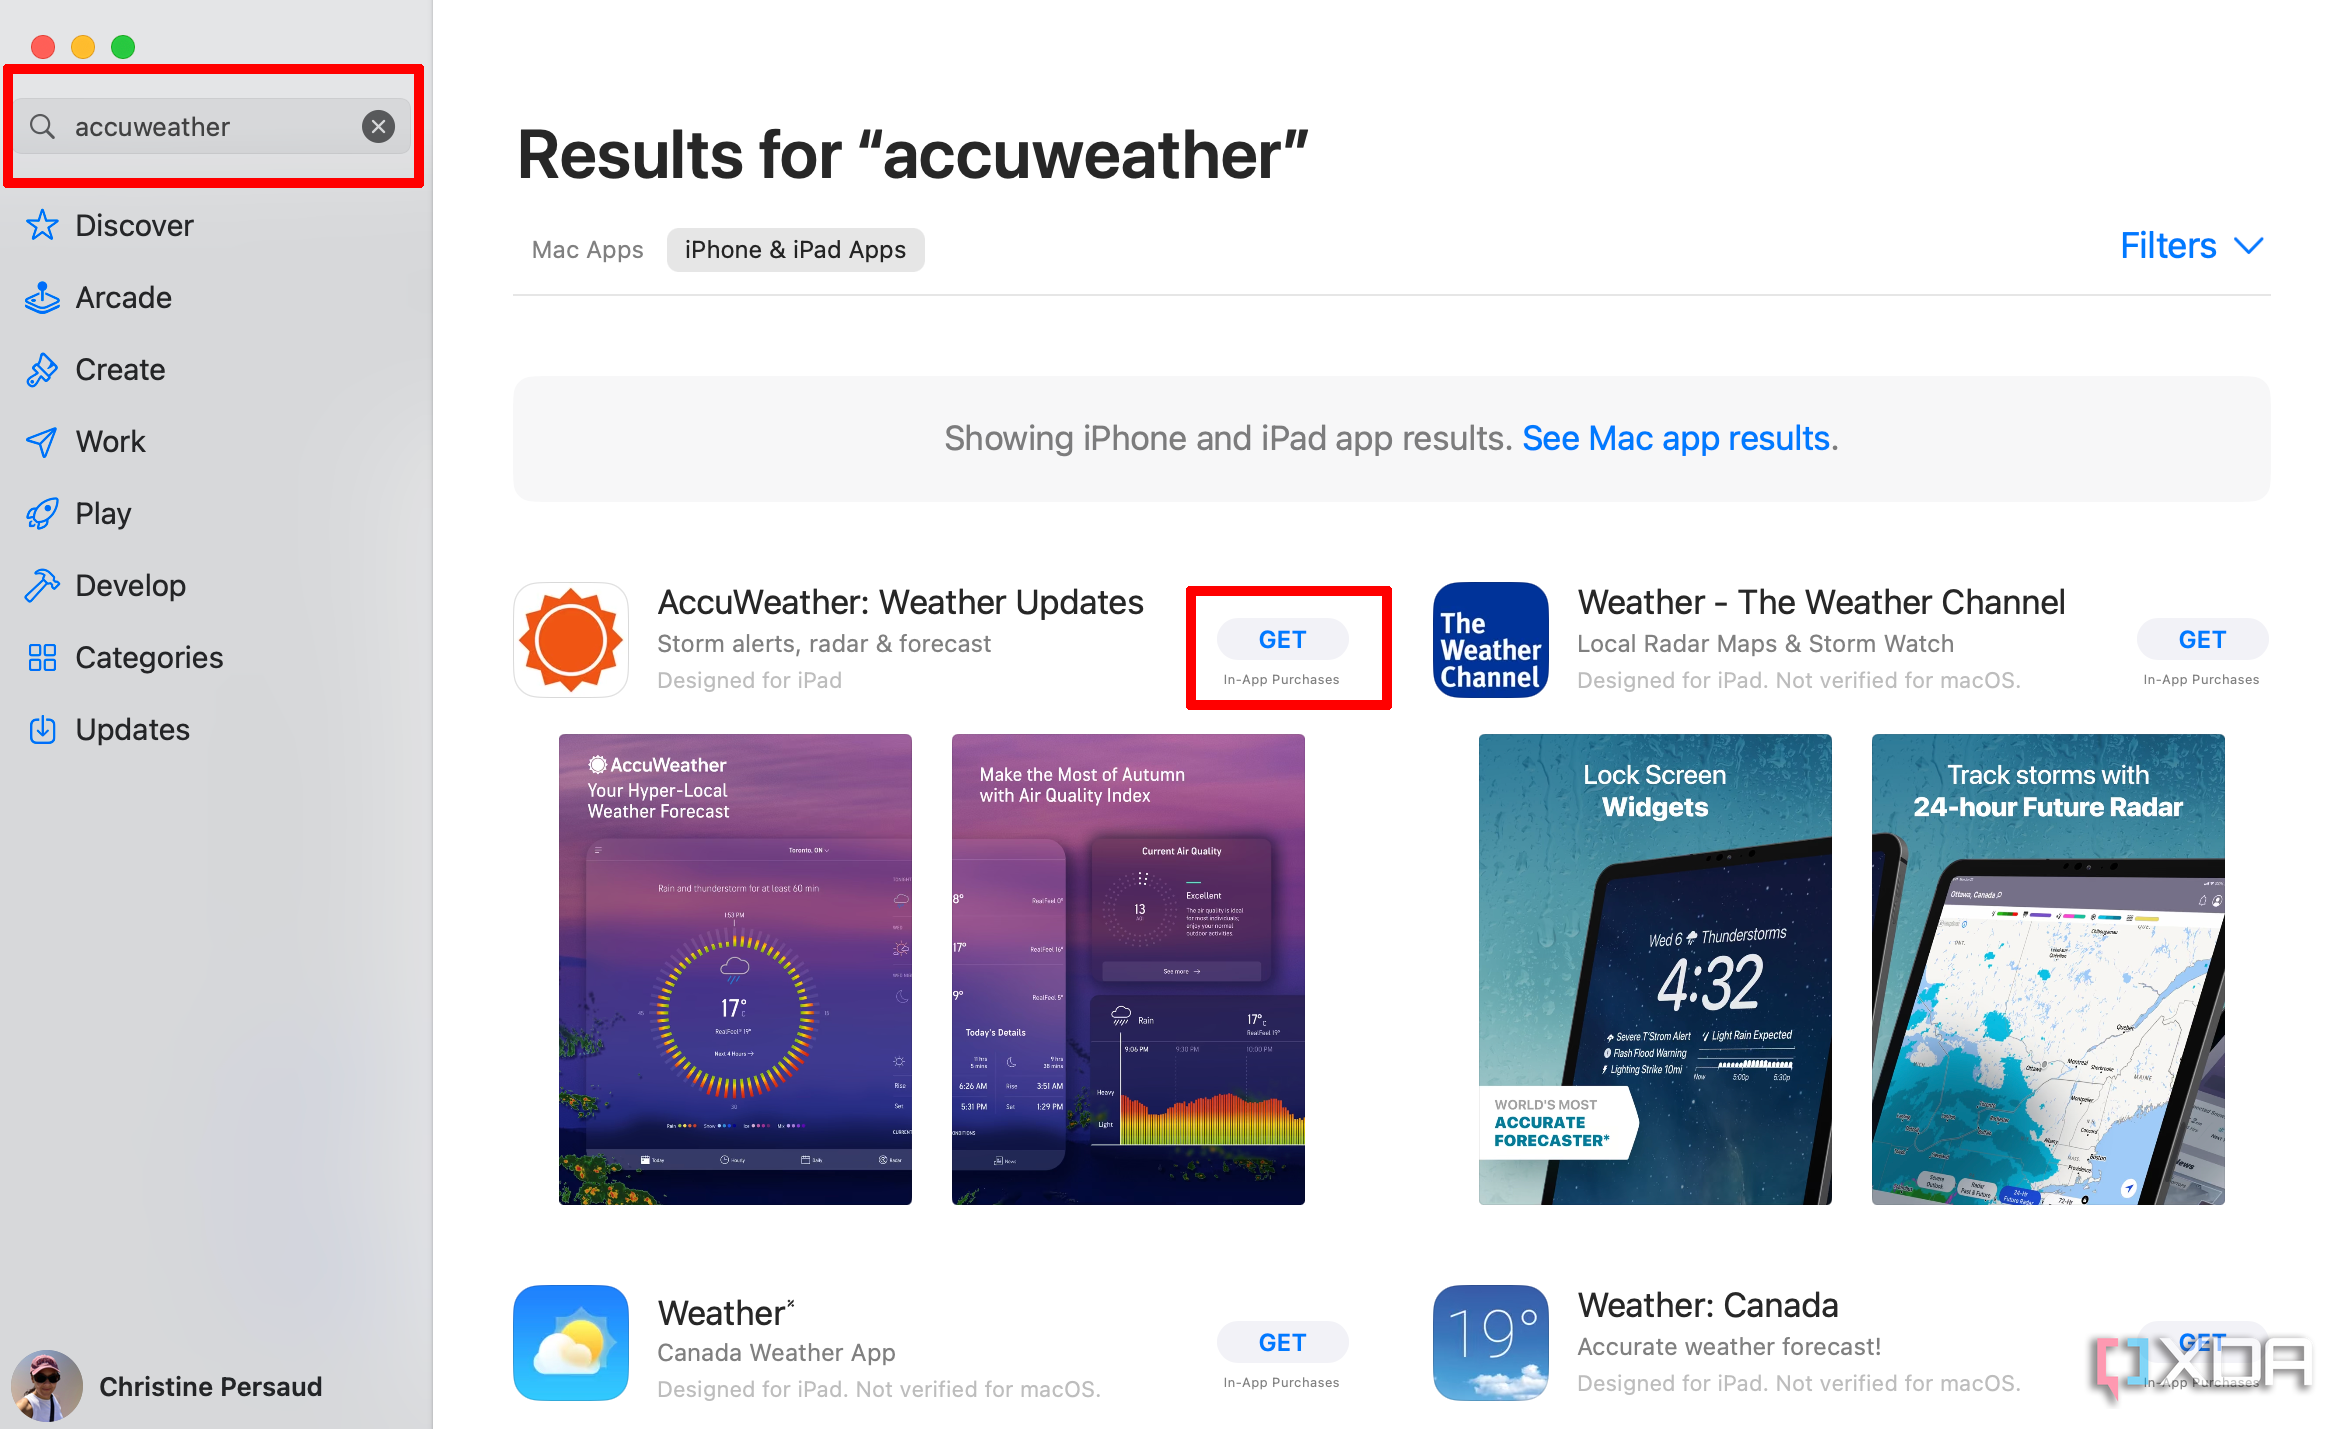 App Store app on a Mac where the Accuweather app is searched for and selected.